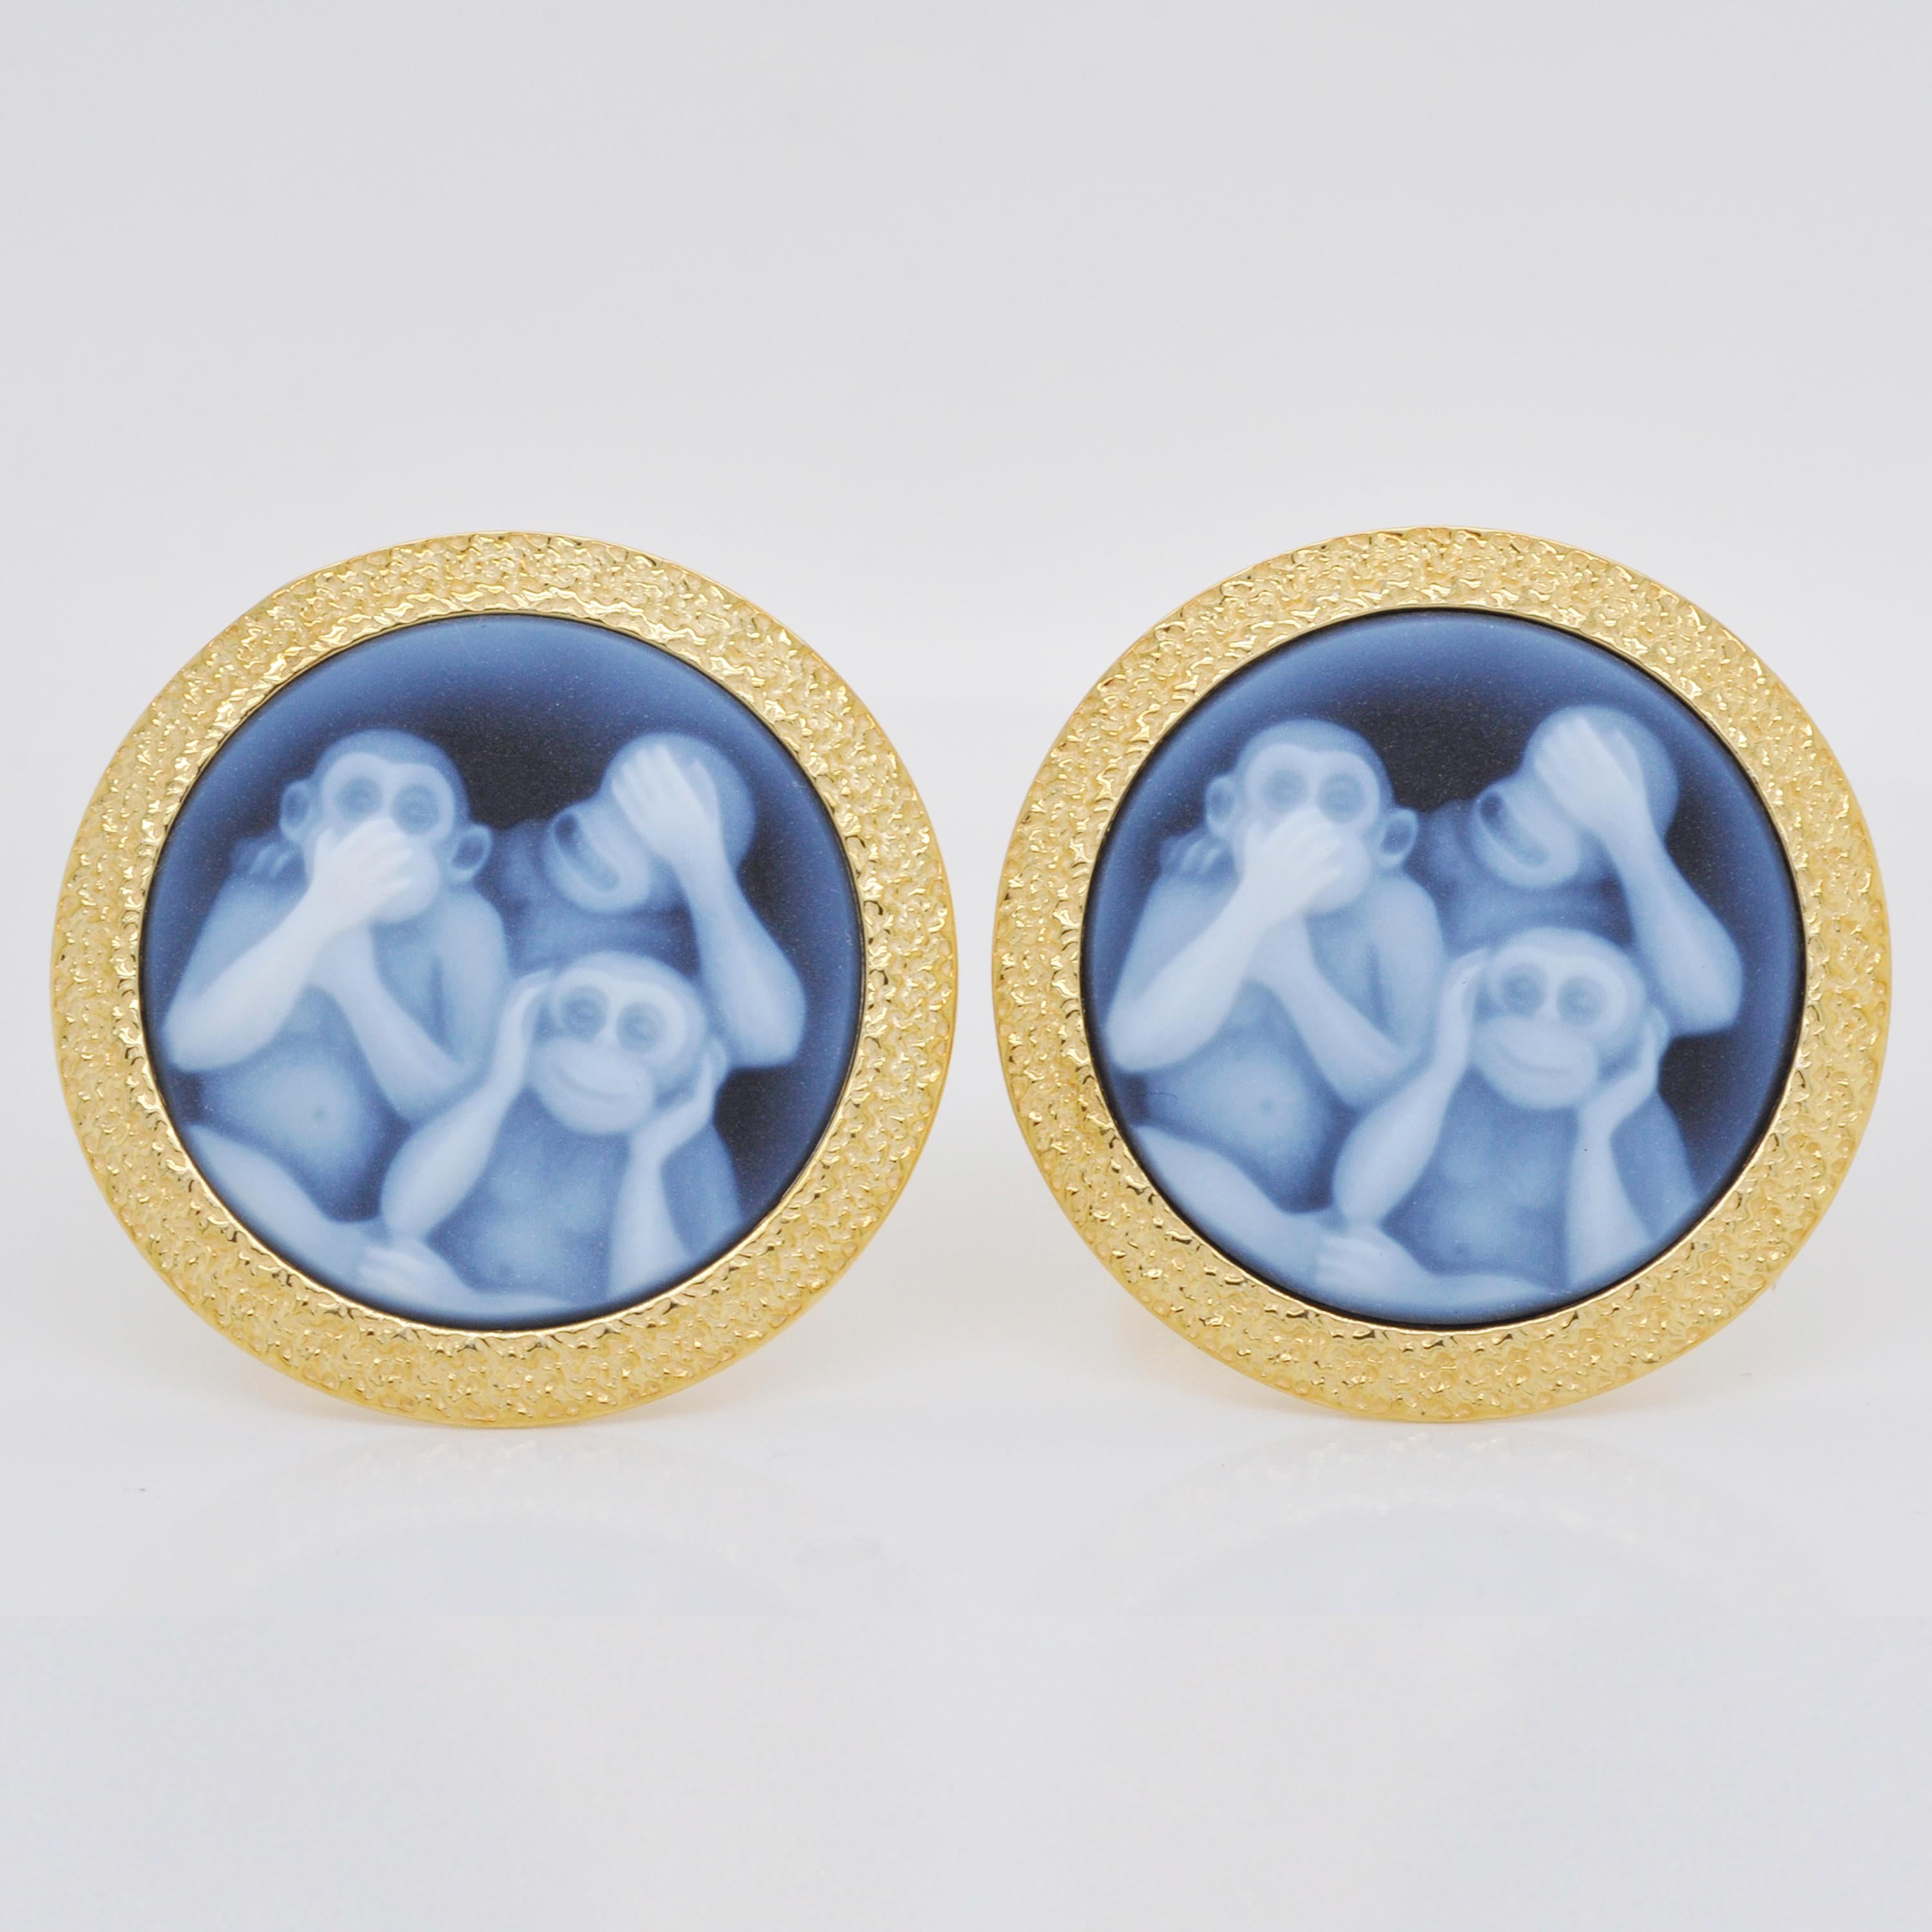 Here's our three wise monkey cameo cufflinks made in sterling silver with gold polish. The cameos are made in Germany by an expert cameo engraver on the relief of 100% natural agate rock from Brazil (a variety of chalcedony) such that the elements